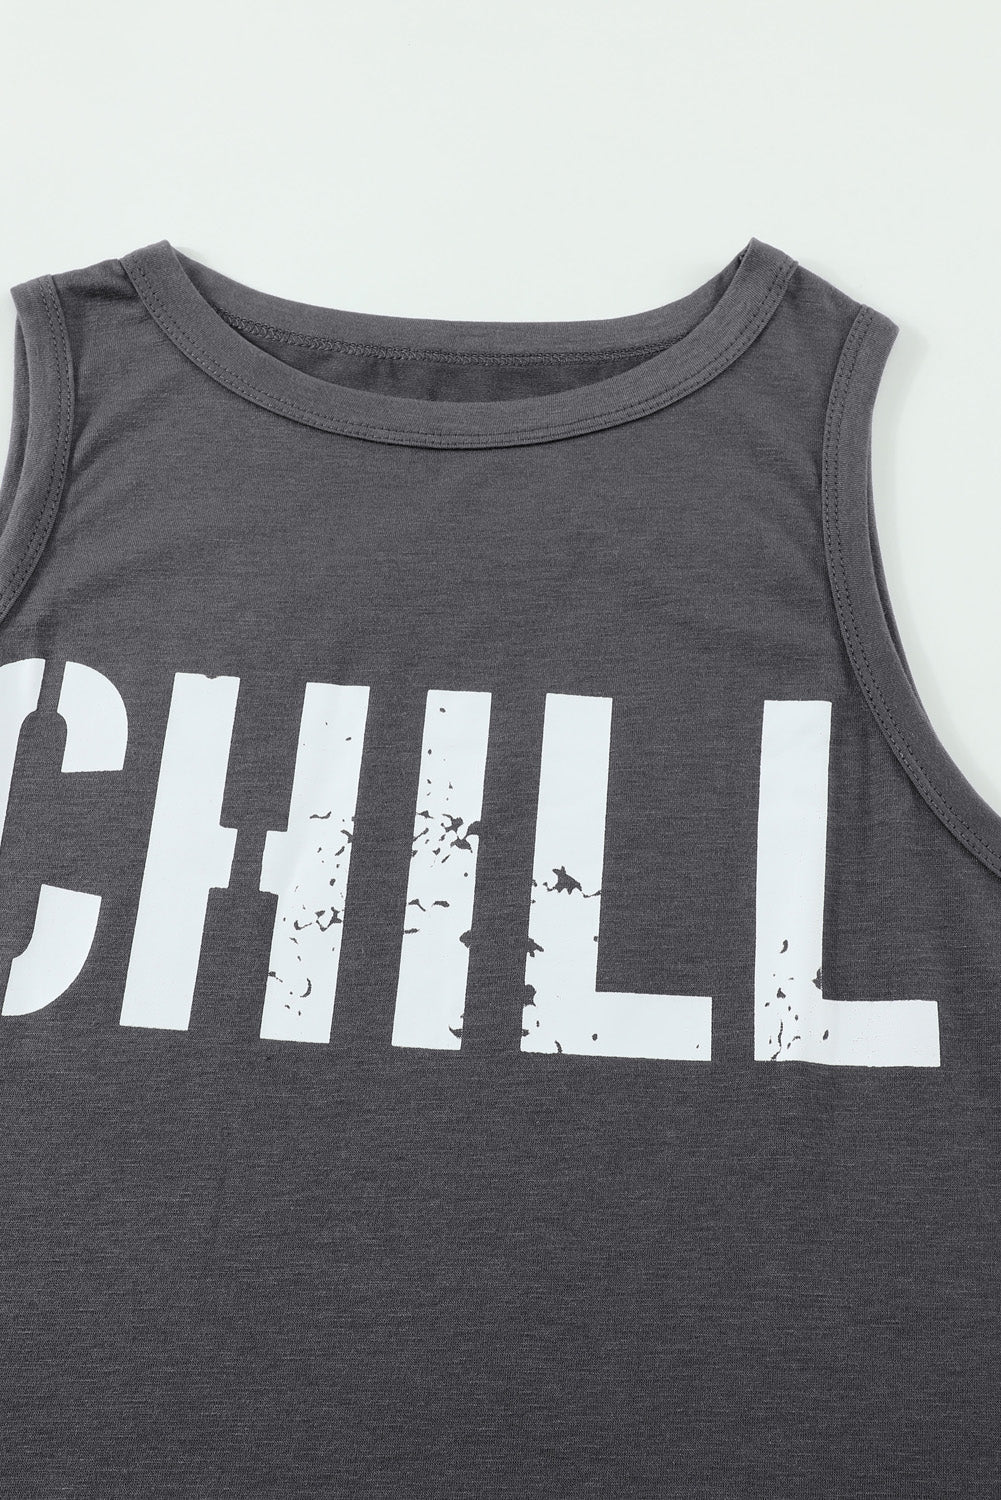 Chill Graphic Print Tank Top